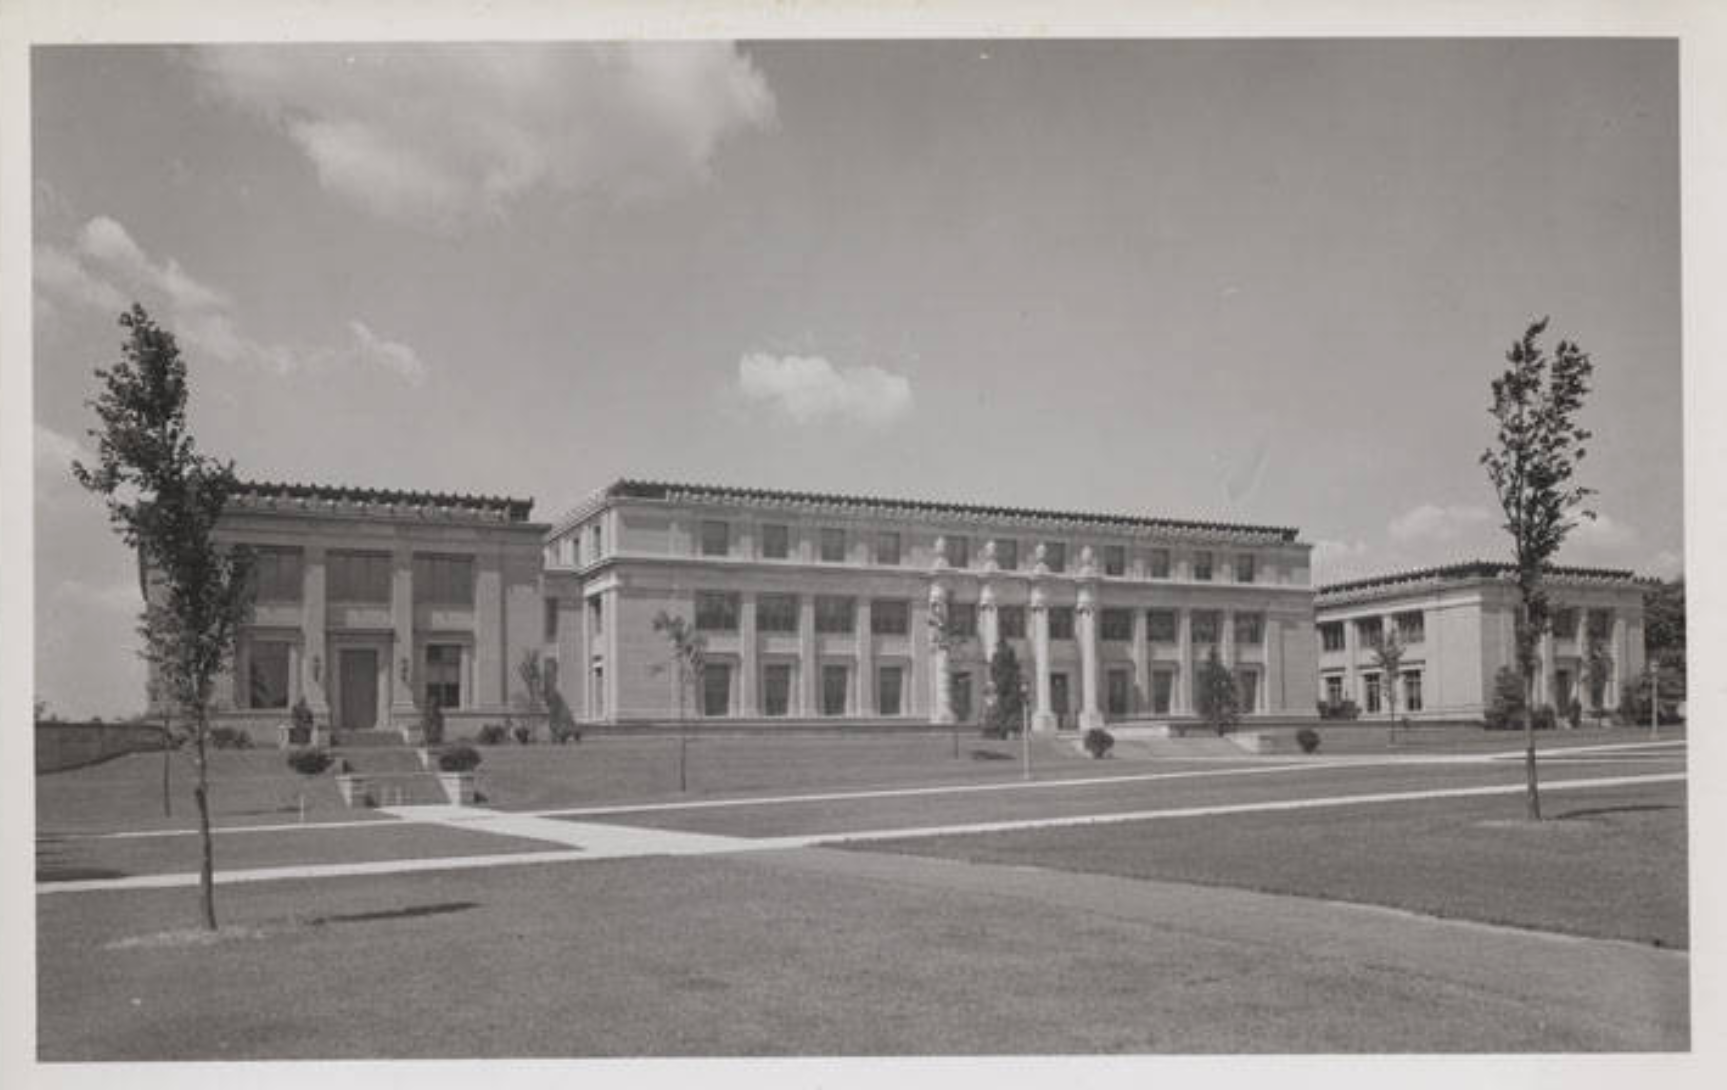 Sparks Building on the far side of Pattee Mall with in 1942